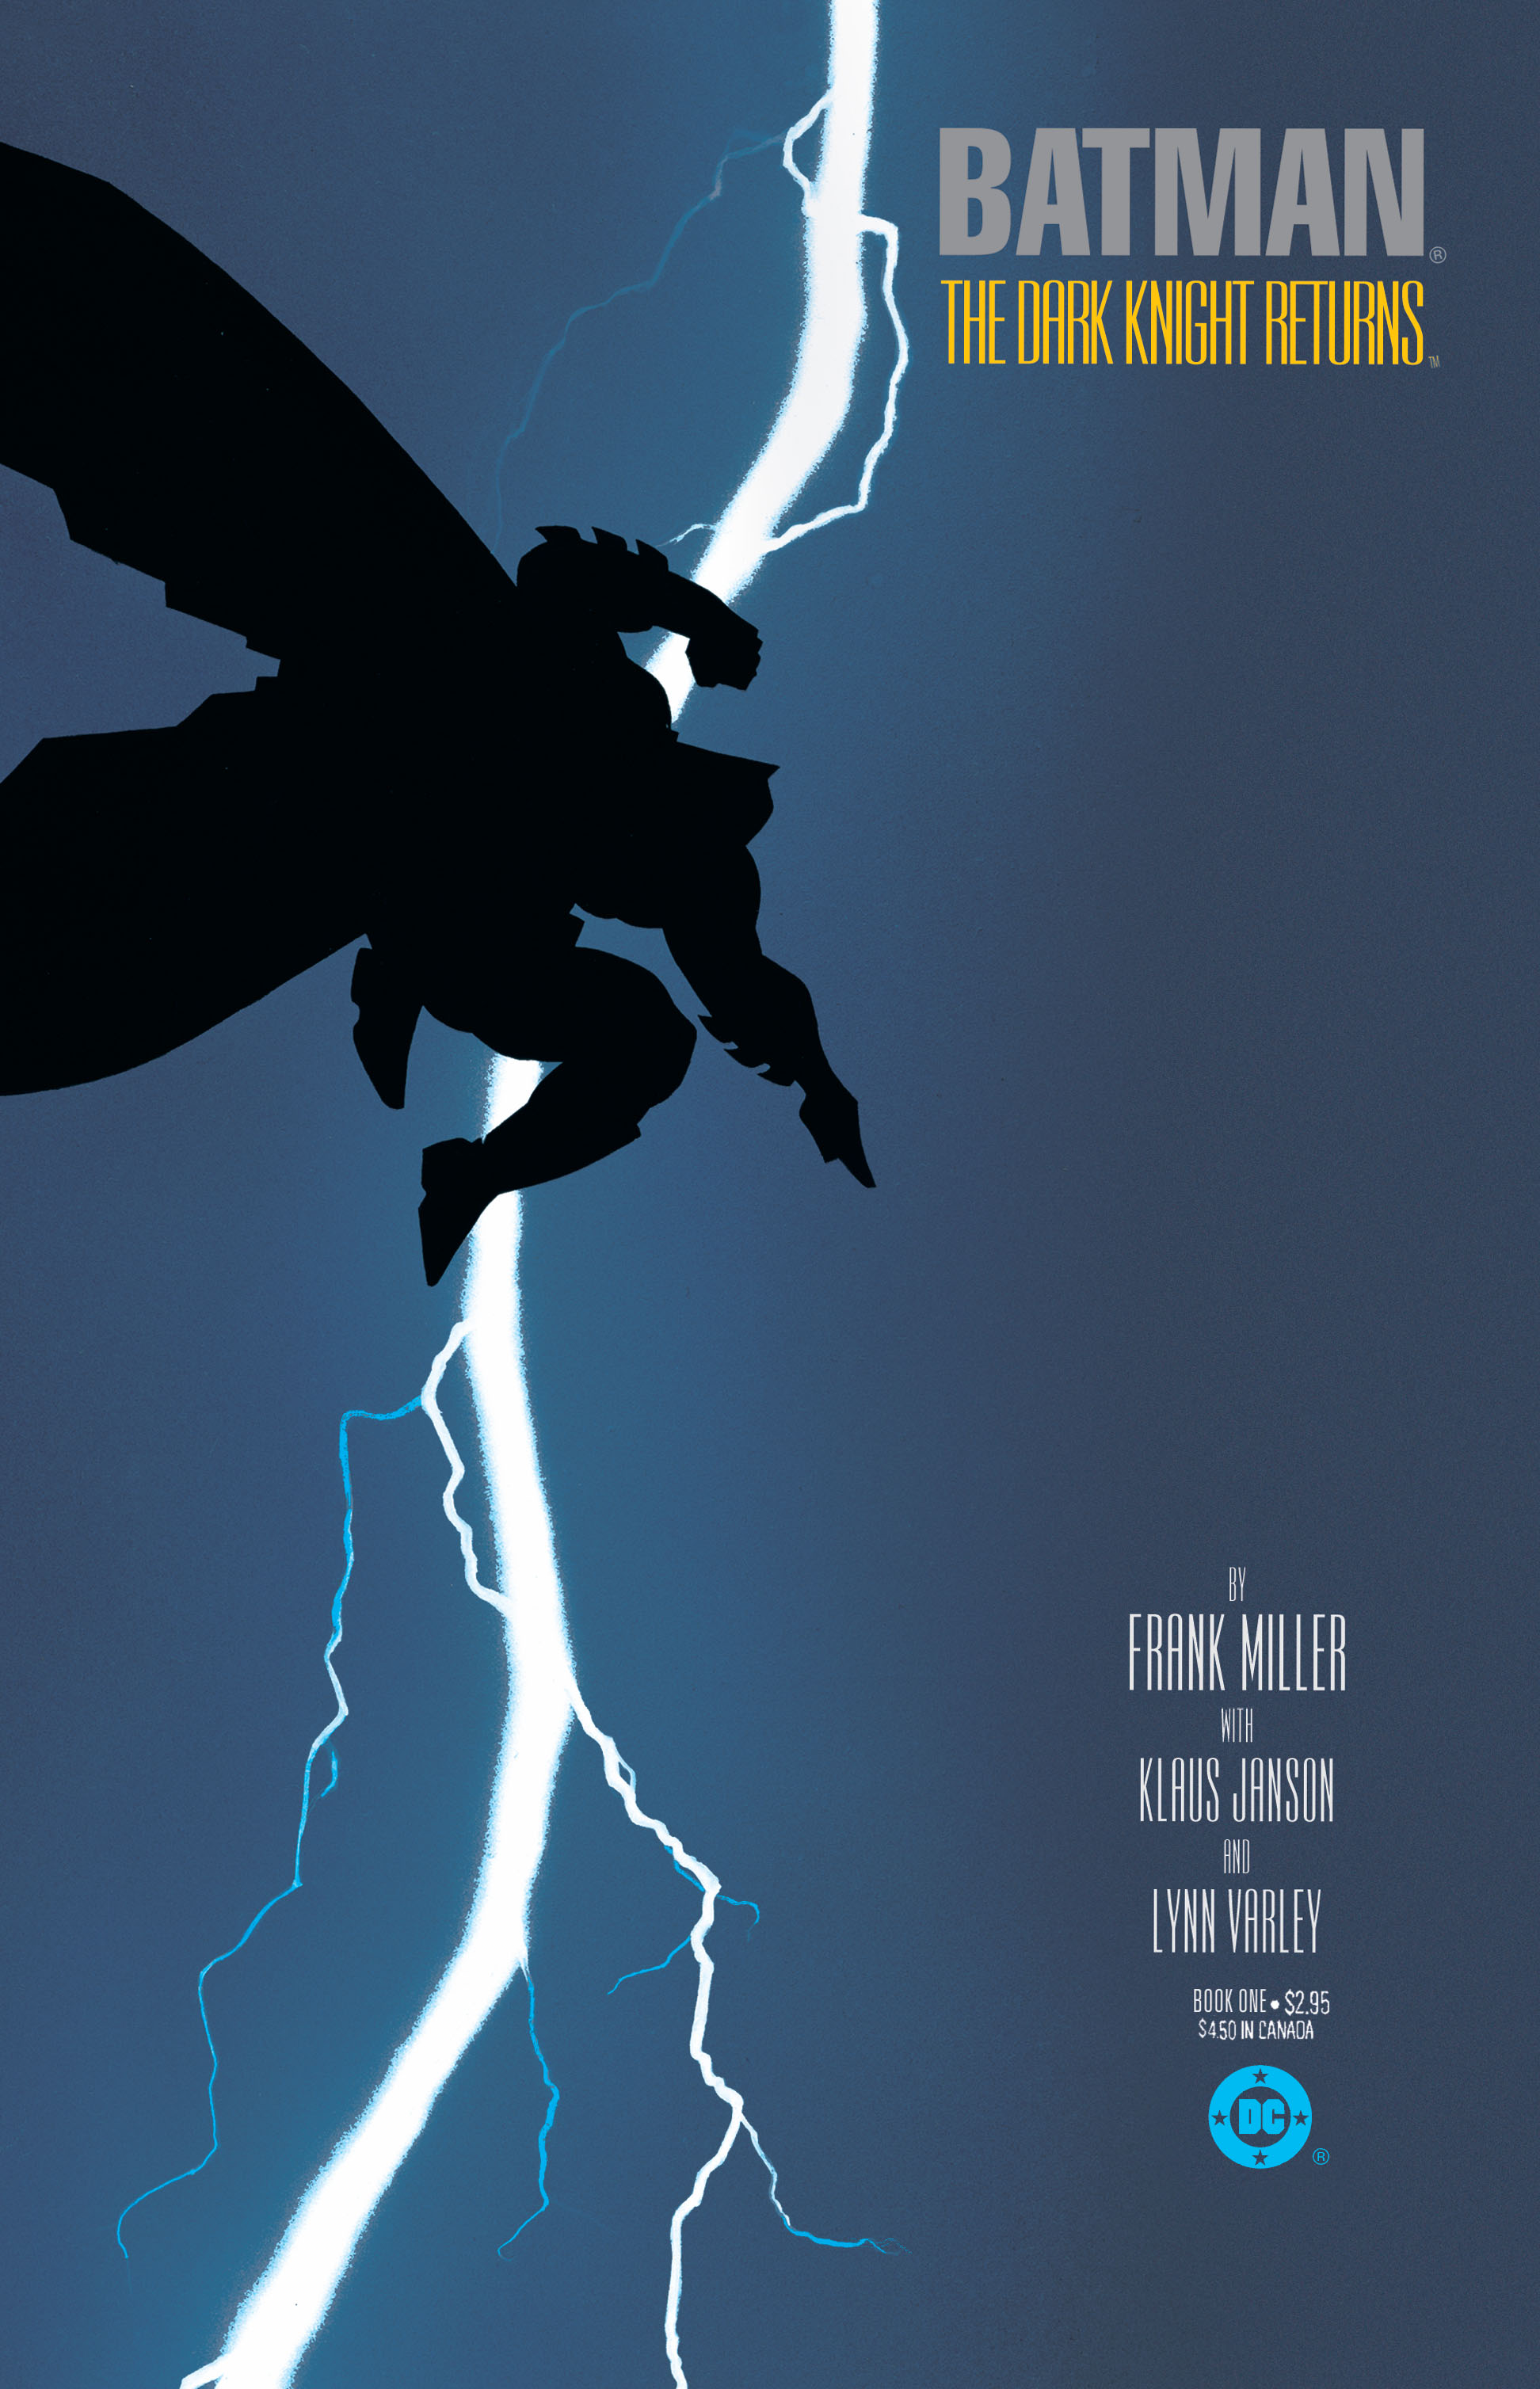 Batman The Dark Knight Returns Issue 1 | Read Batman The Dark Knight Returns  Issue 1 comic online in high quality. Read Full Comic online for free -  Read comics online in